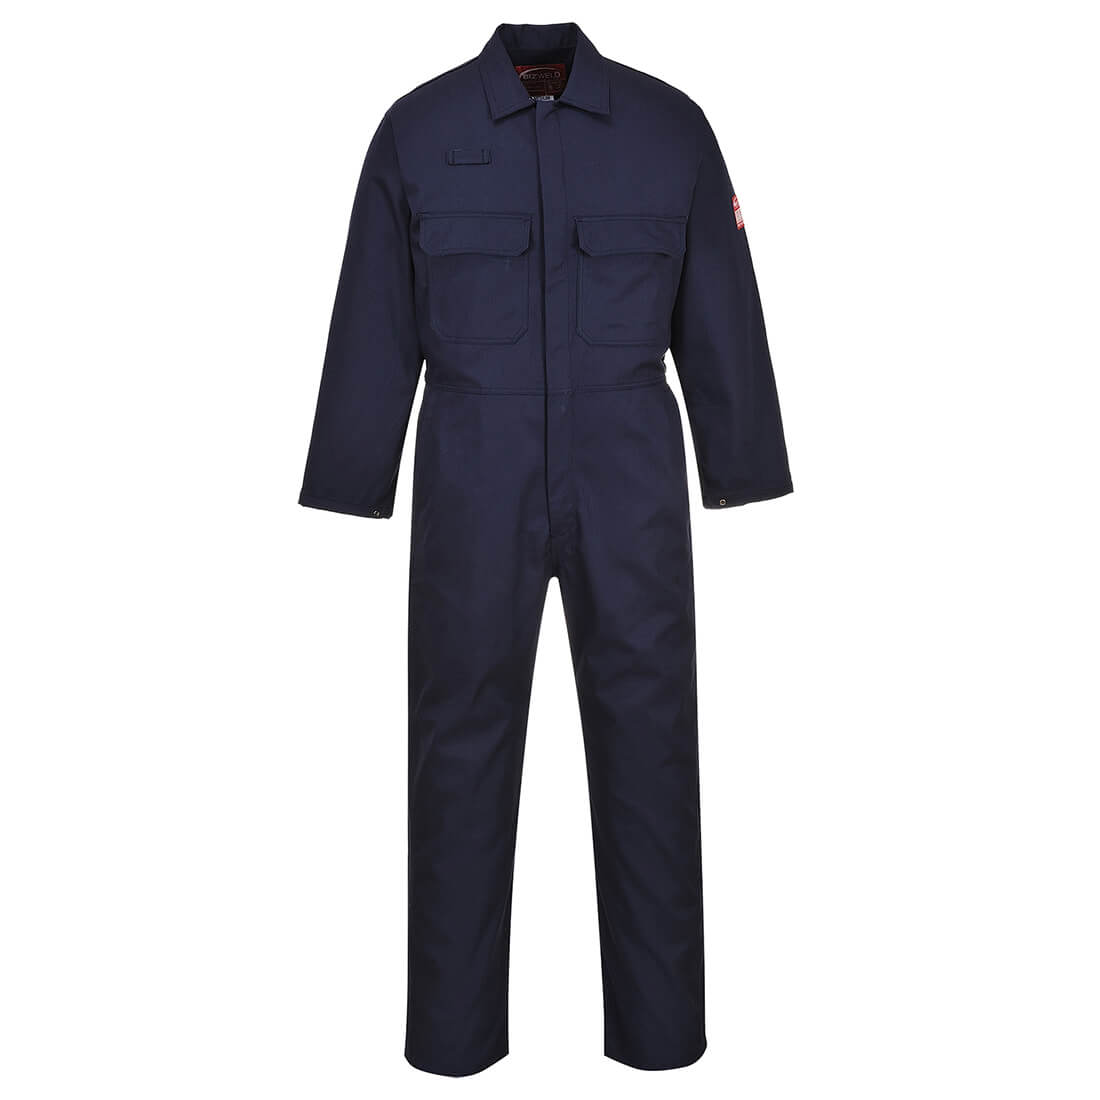 Image of Biz Weld Mens Flame Resistant Overall Navy Blue S 34"